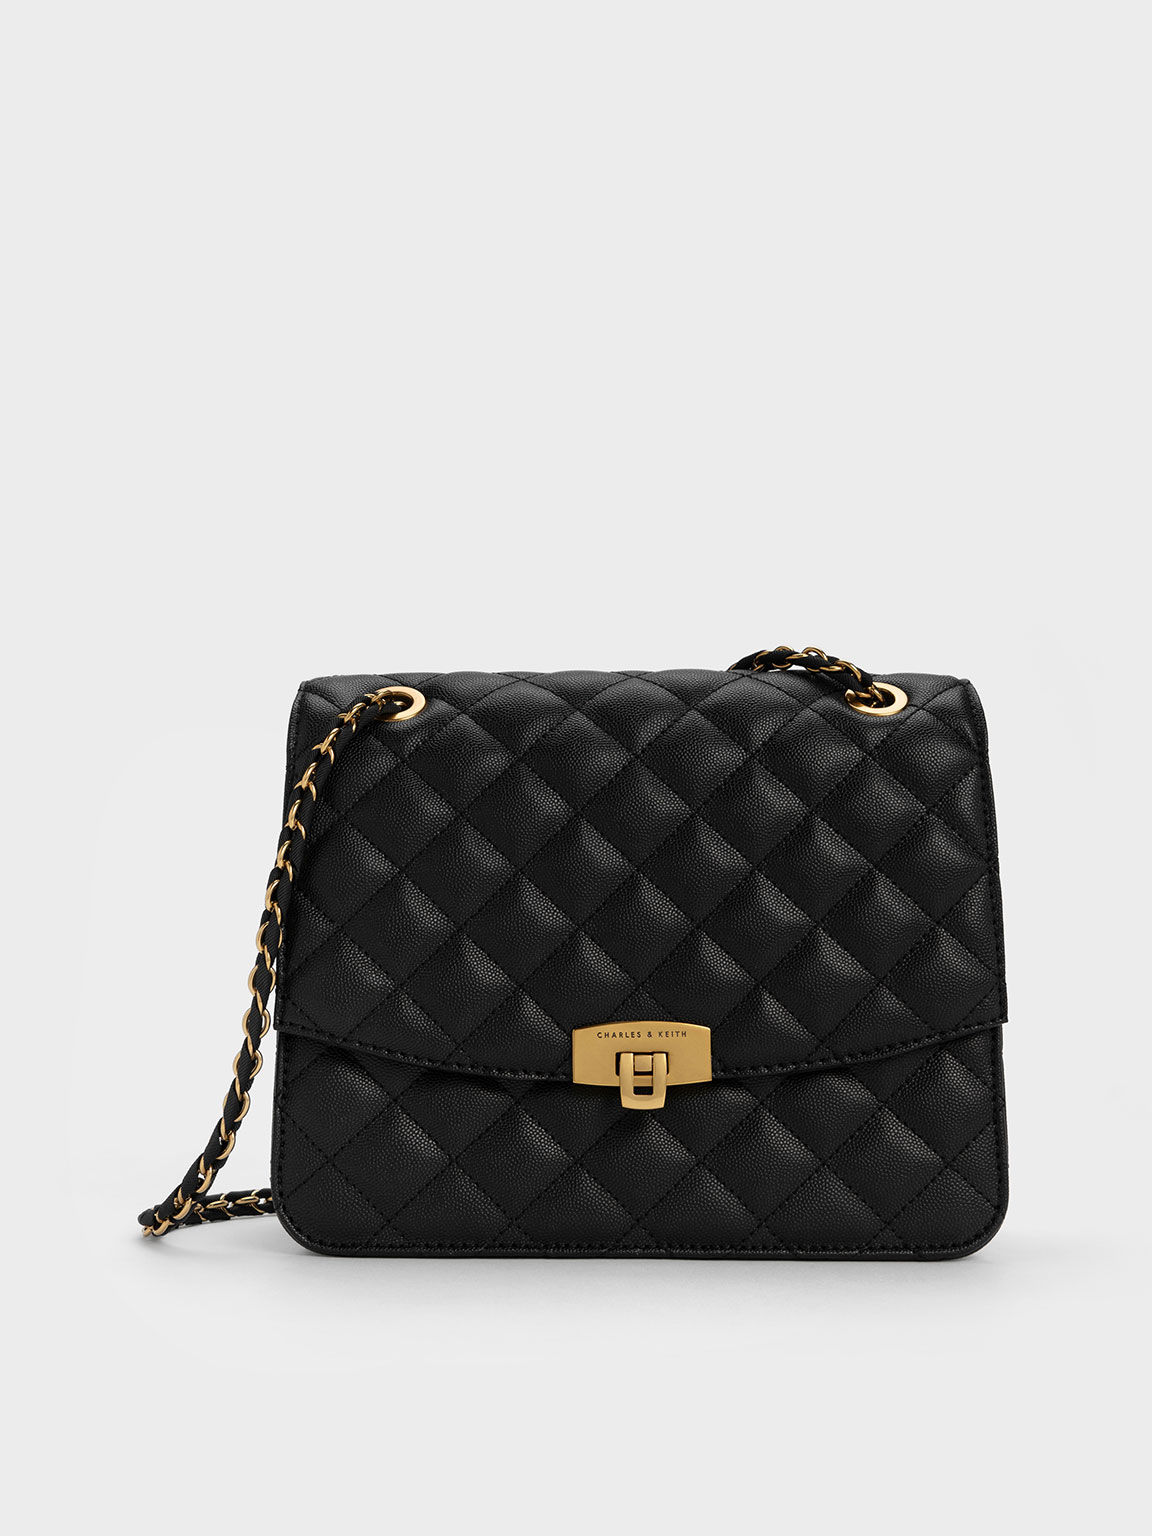 Charles & Keith Quilted Chain Strap Bag In Black